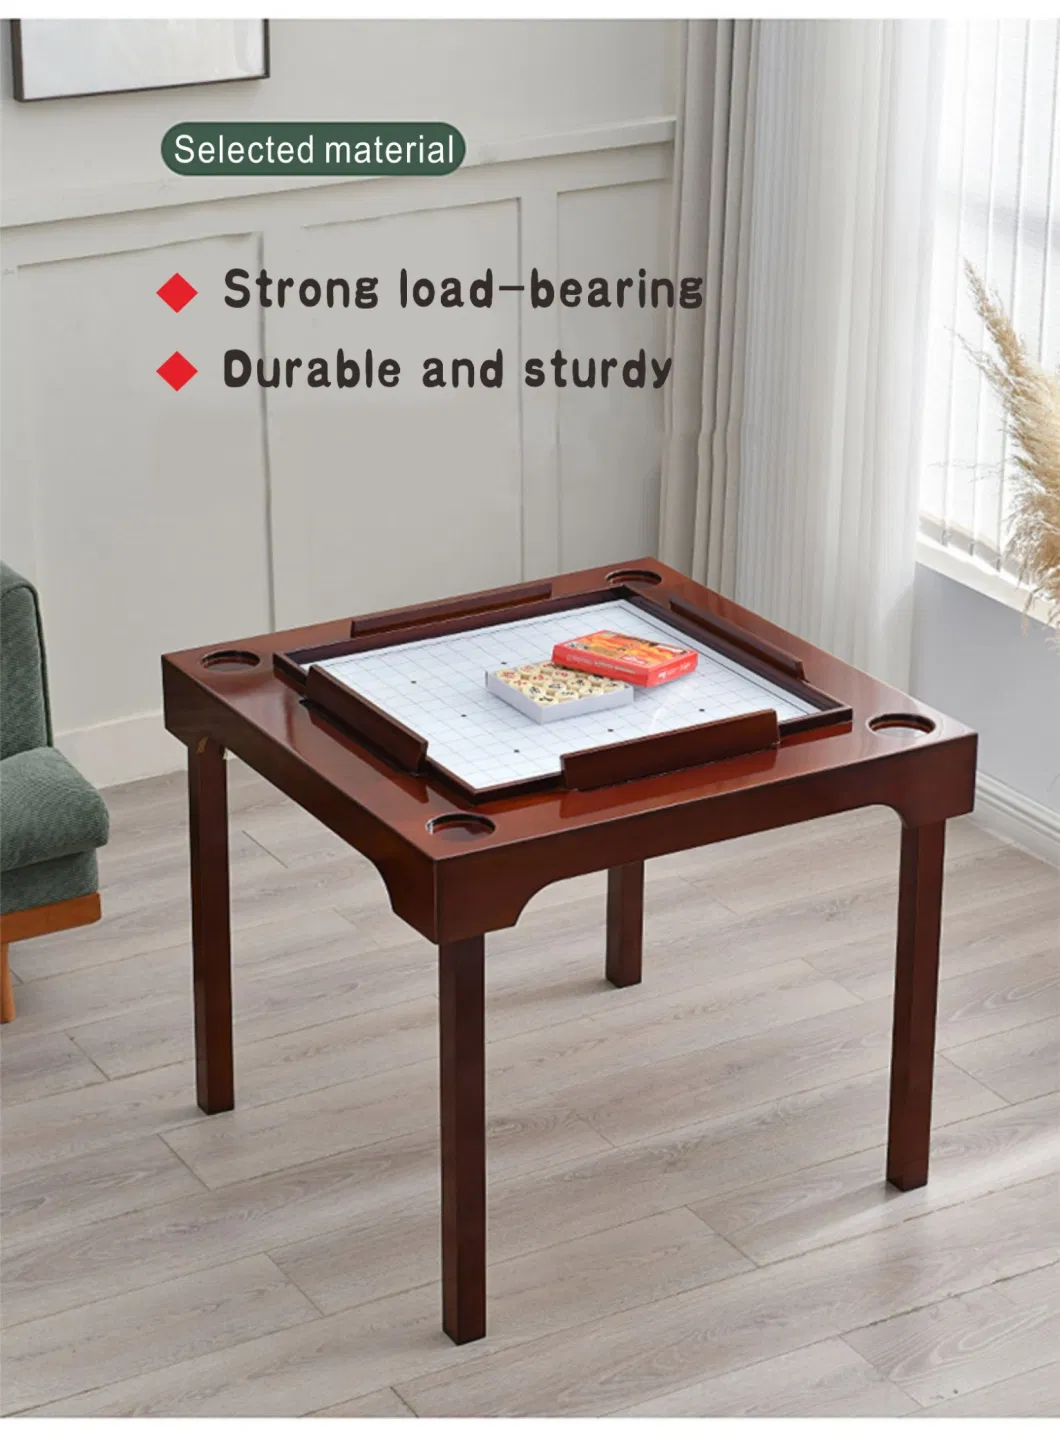 Wooden Domino Table MDF Folding Metal Legs Table Manufacture for 4 Players Play Casino Games